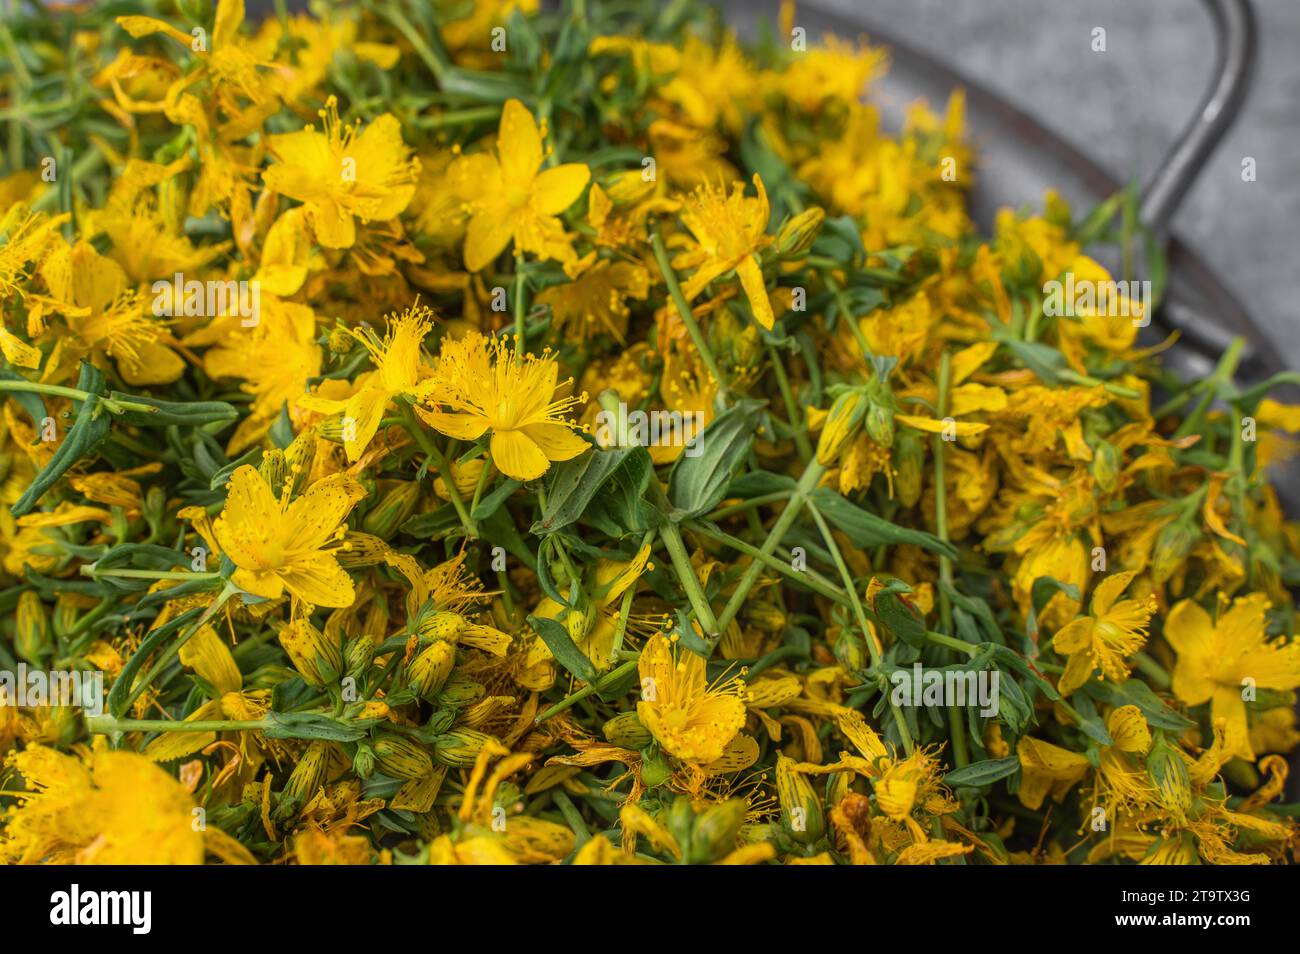 medicinal herb St. John's wort is prepared for drying. twigs and dried flowers of St. John's wort, Top view, flat lay, close-up. Stock Photo